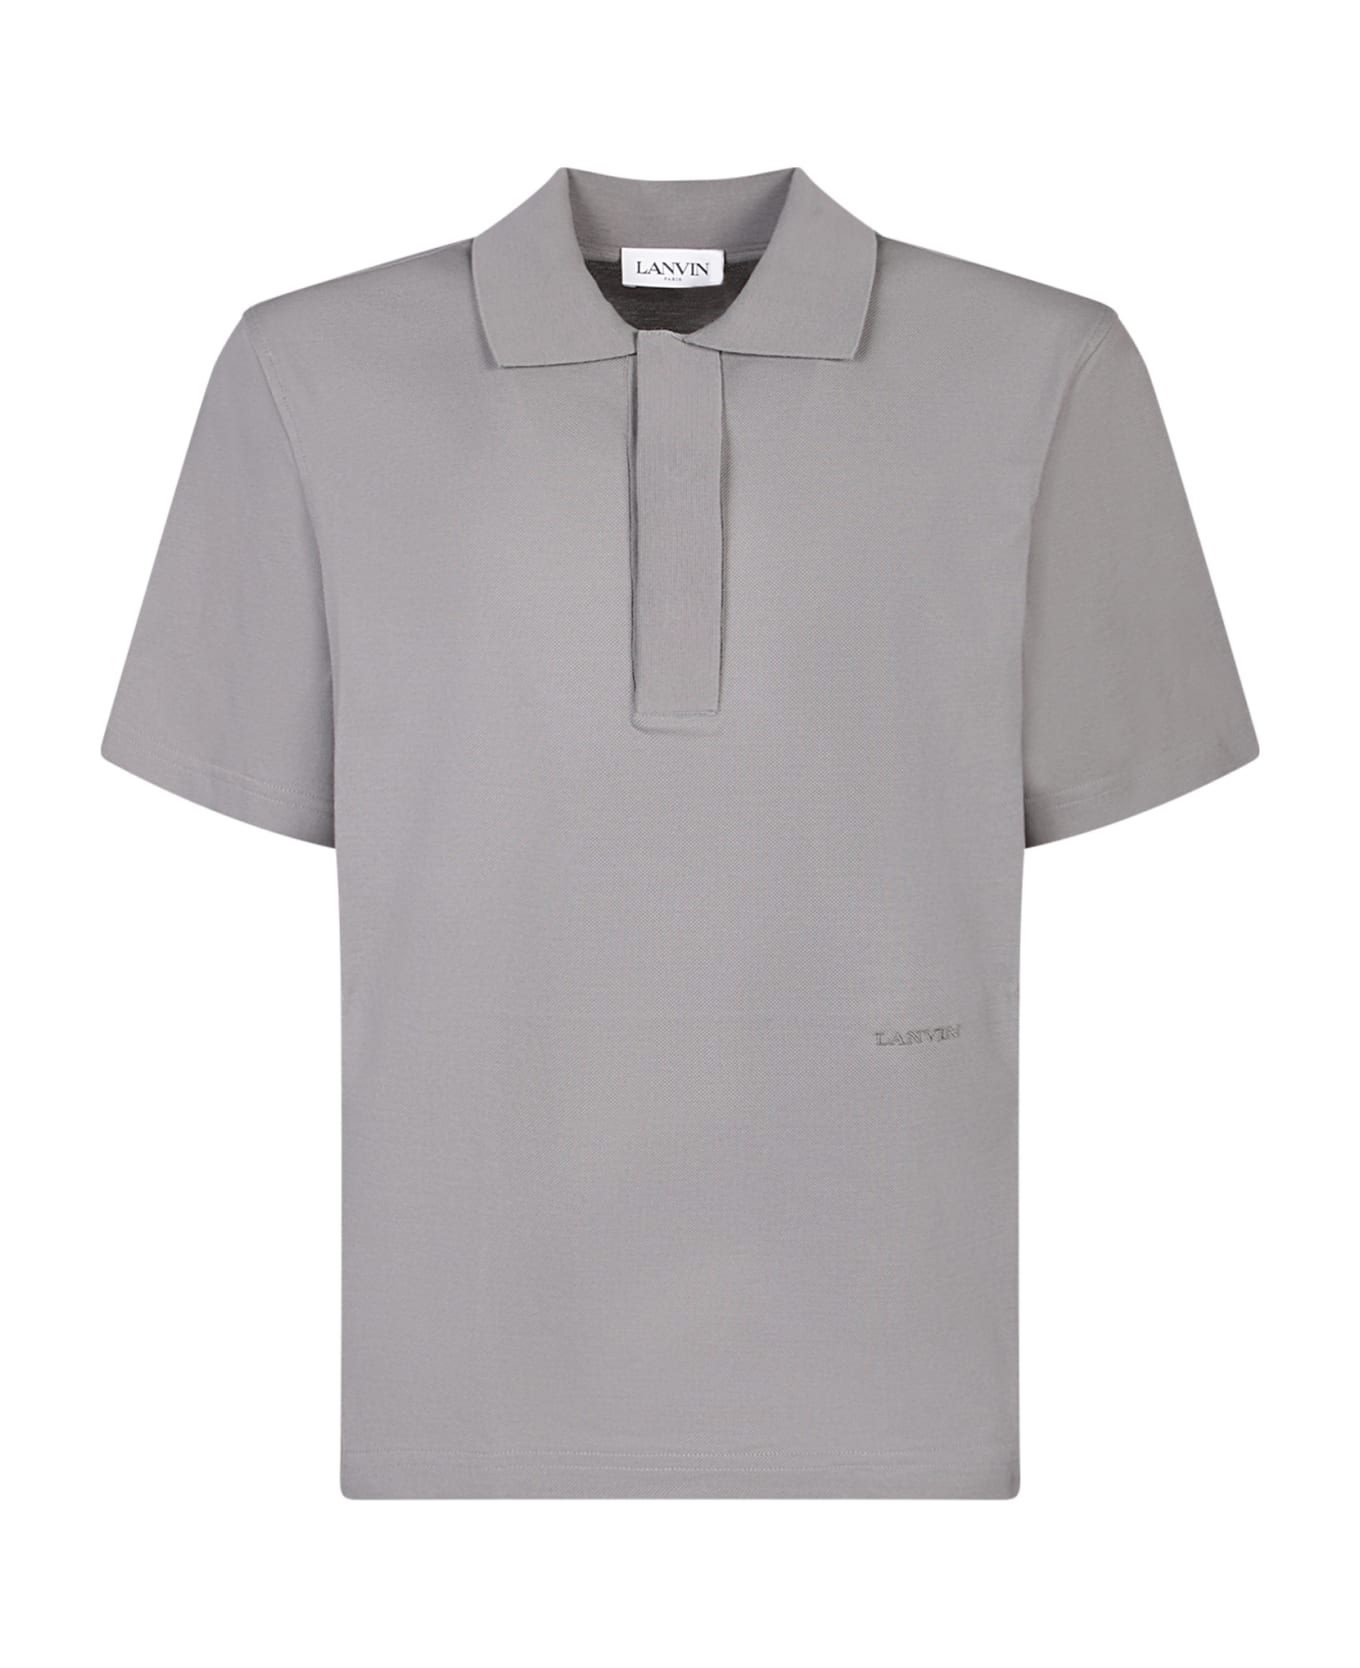 Lanvin Regular Fit Taupe Polo Shirt - Beige